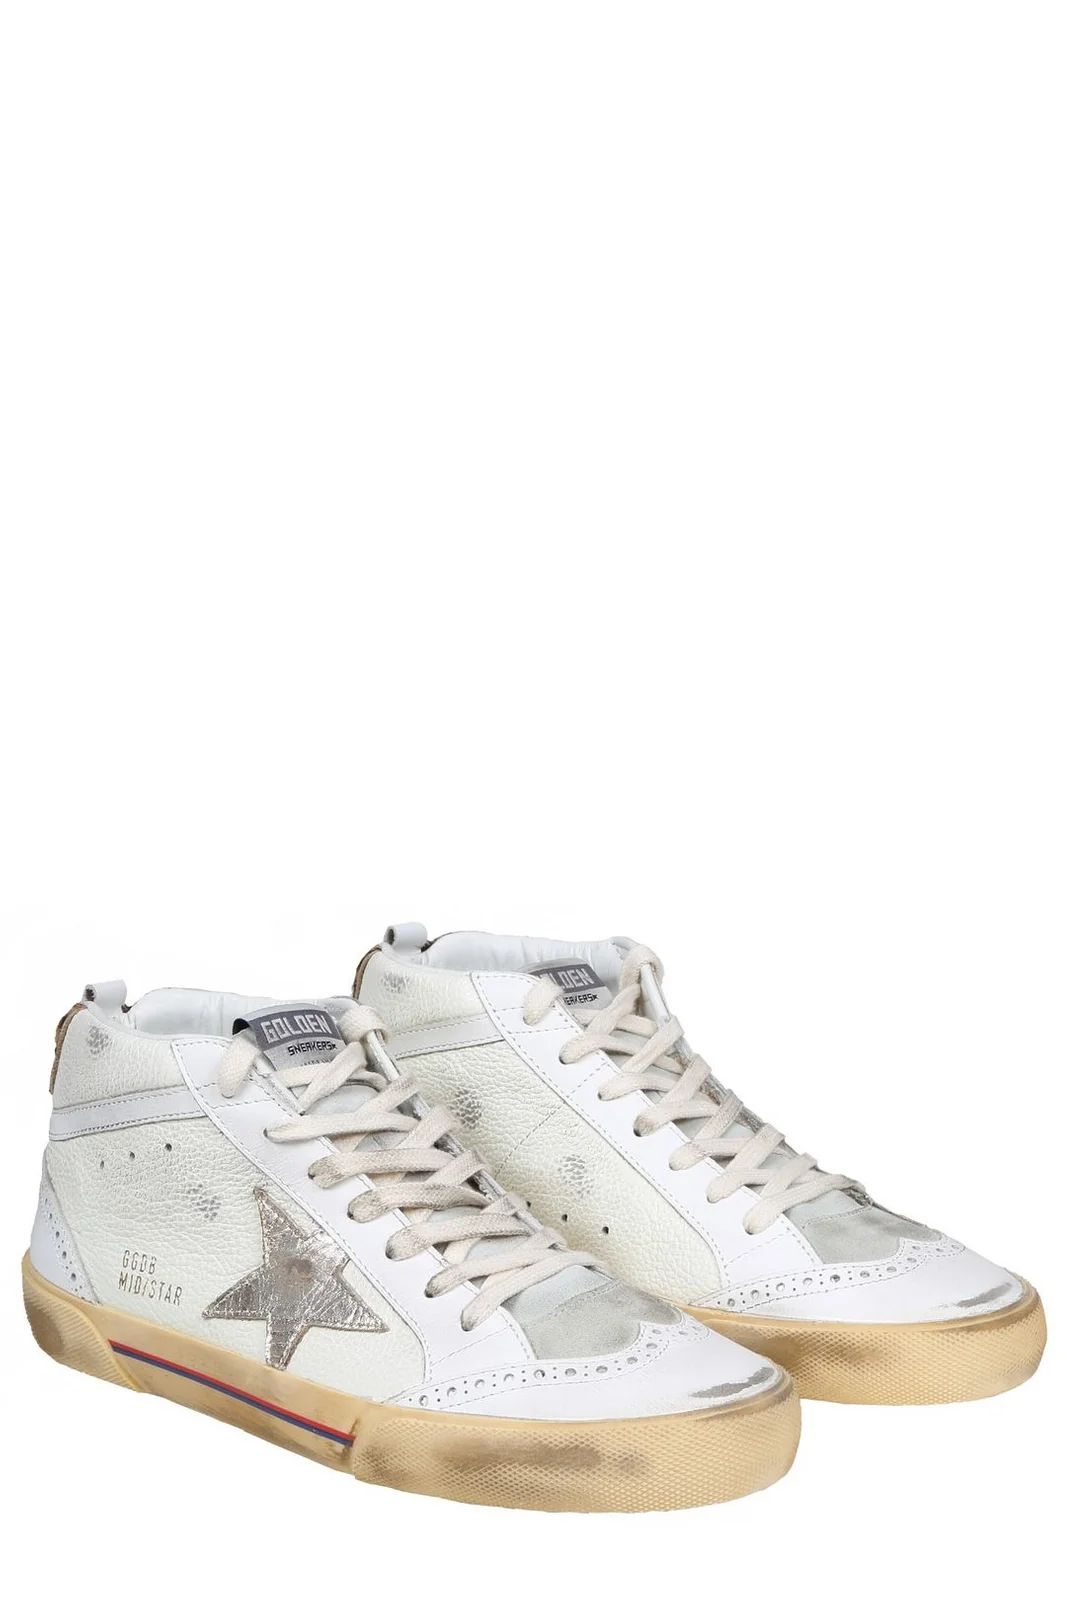 Golden Goose Deluxe Brand Mid Star Lace-Up Sneakers | Cettire Global